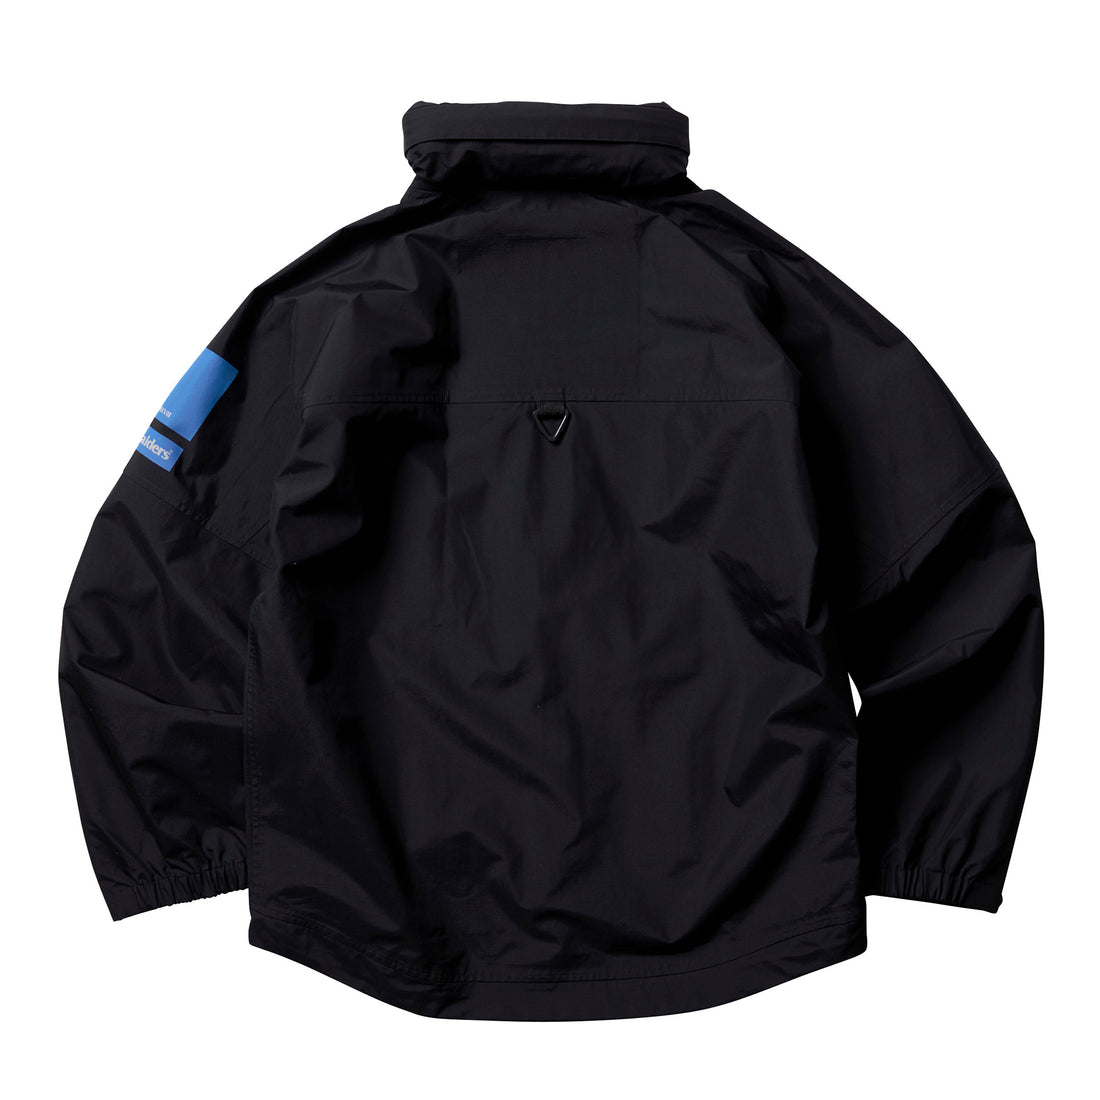 LIBERAIDERS - ALL CONDITIONS 3 LAYER JACKET - BLACK